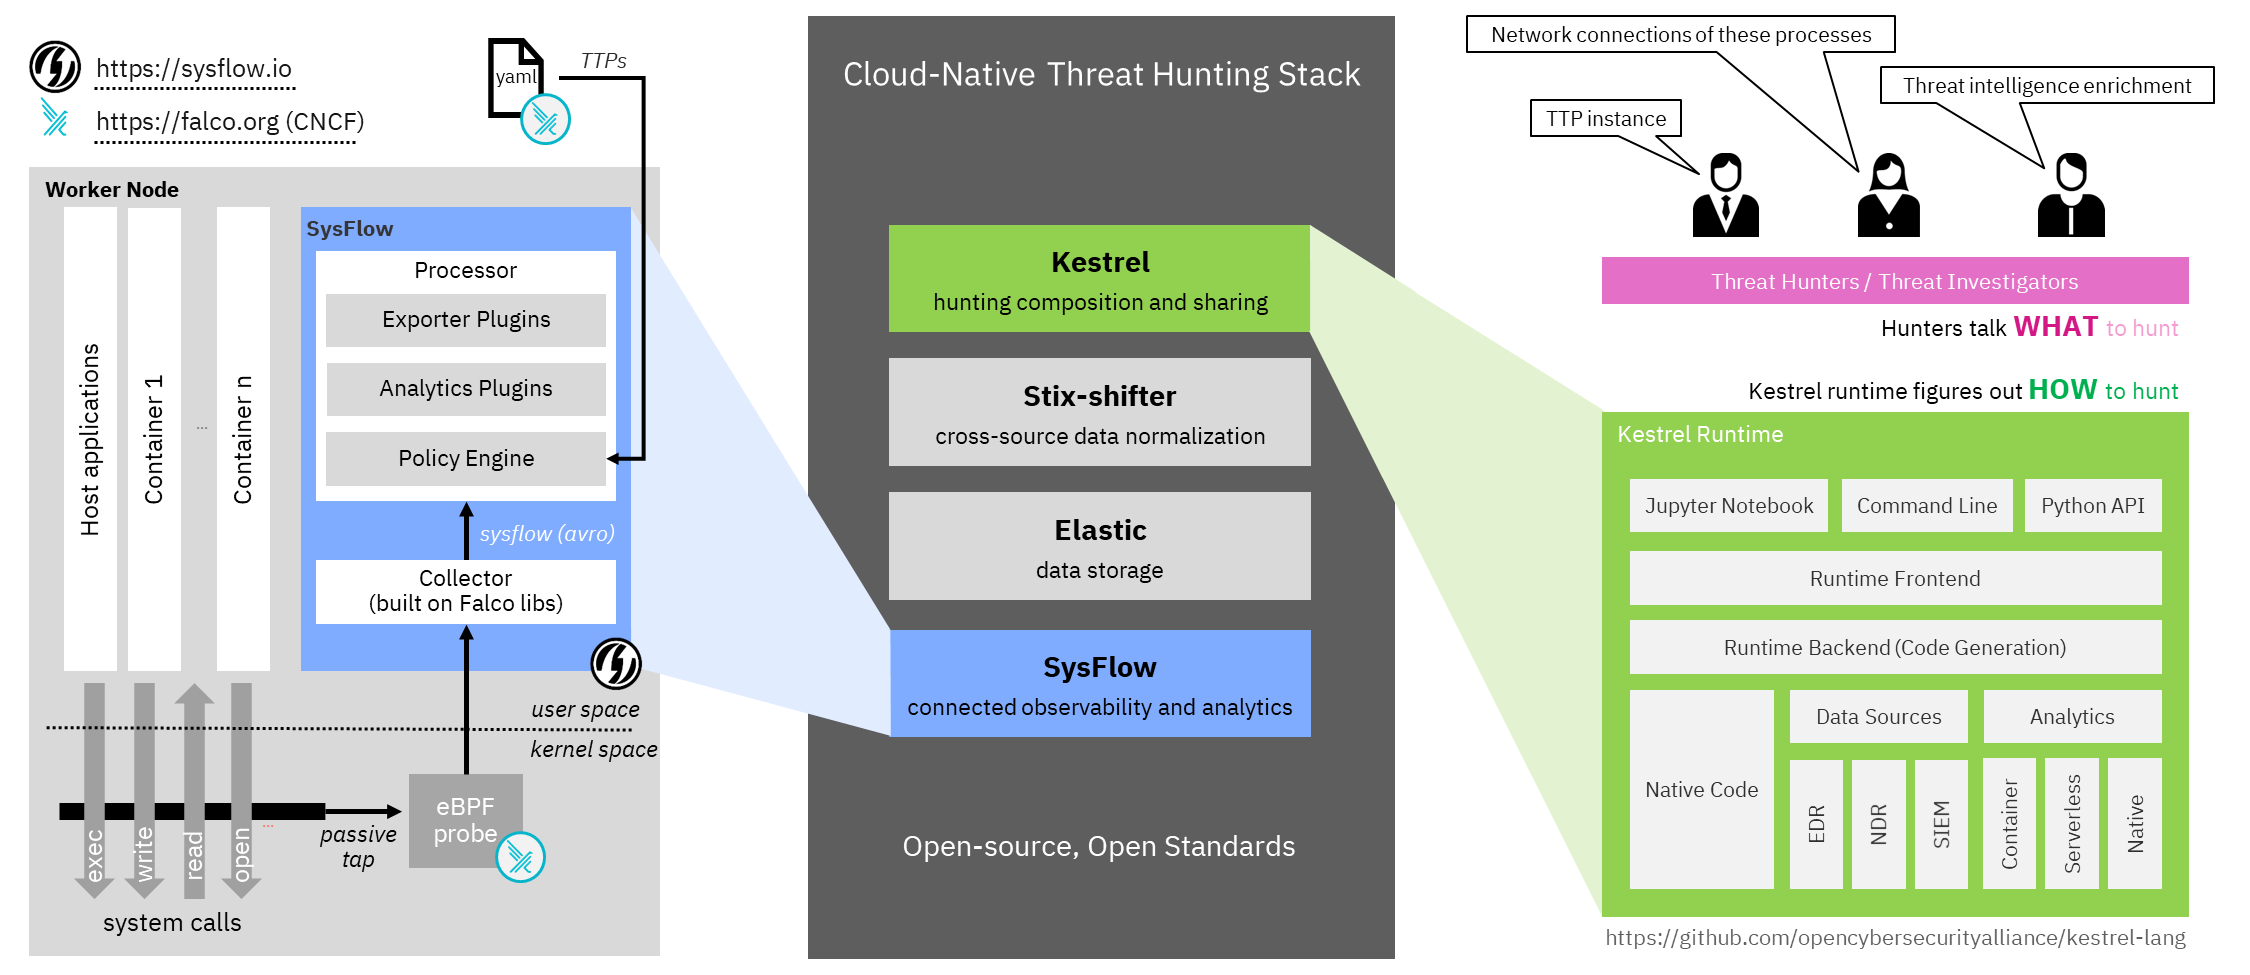 Open Hunting Stack in Hybrid Cloud